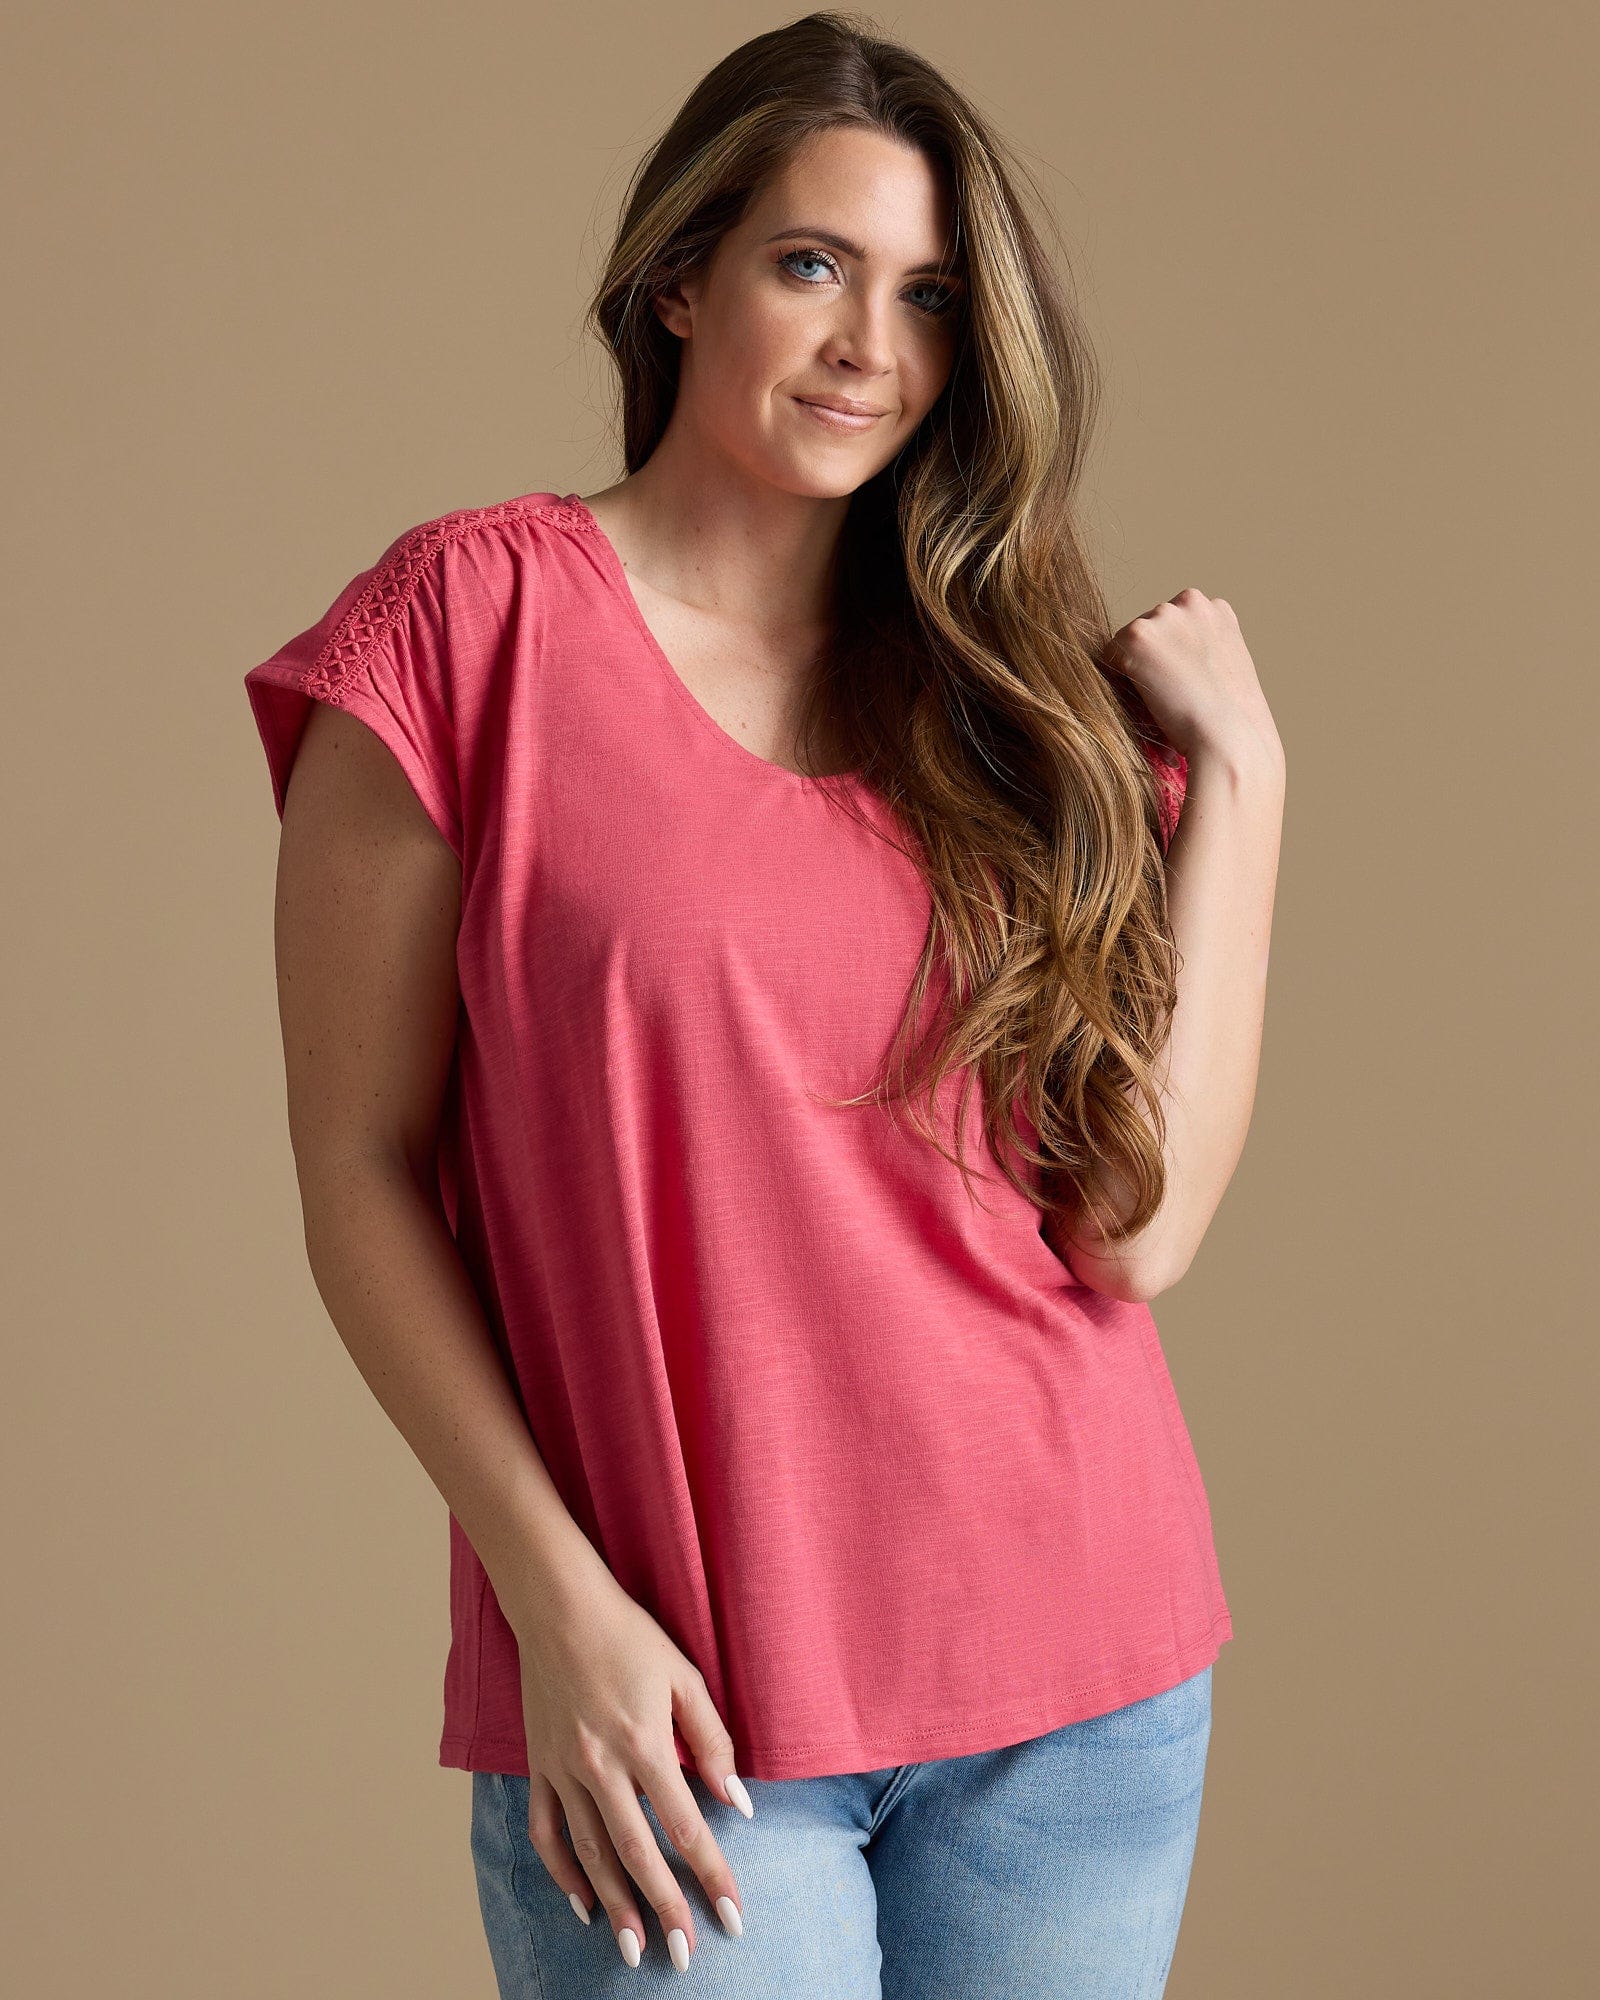 Woman in a pink v-neck top